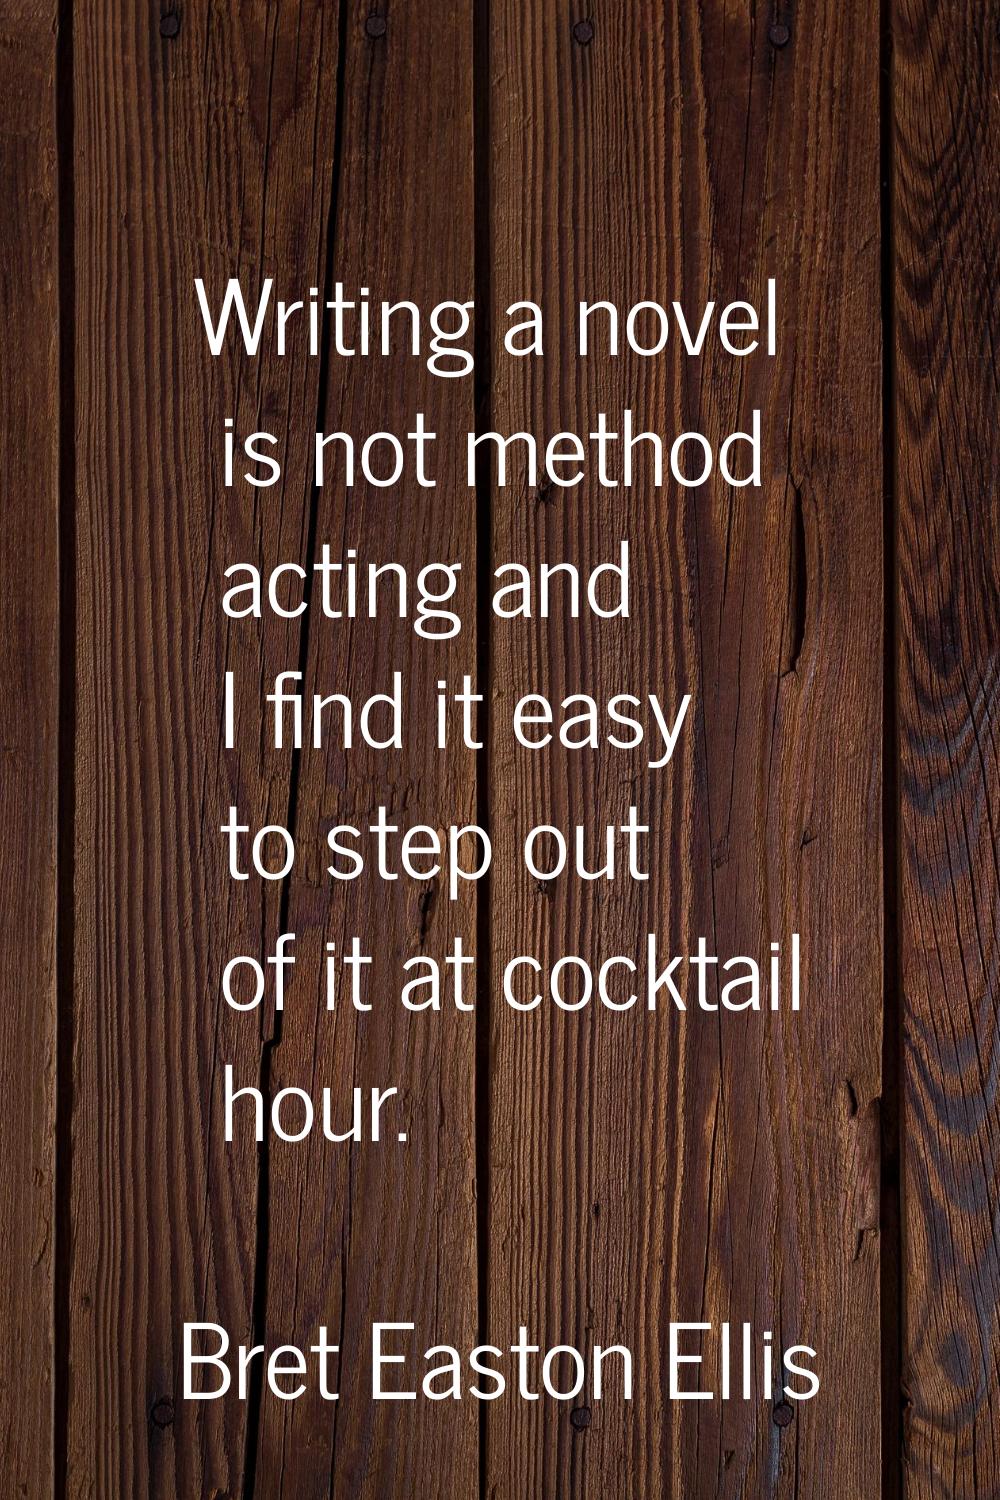 Writing a novel is not method acting and I find it easy to step out of it at cocktail hour.